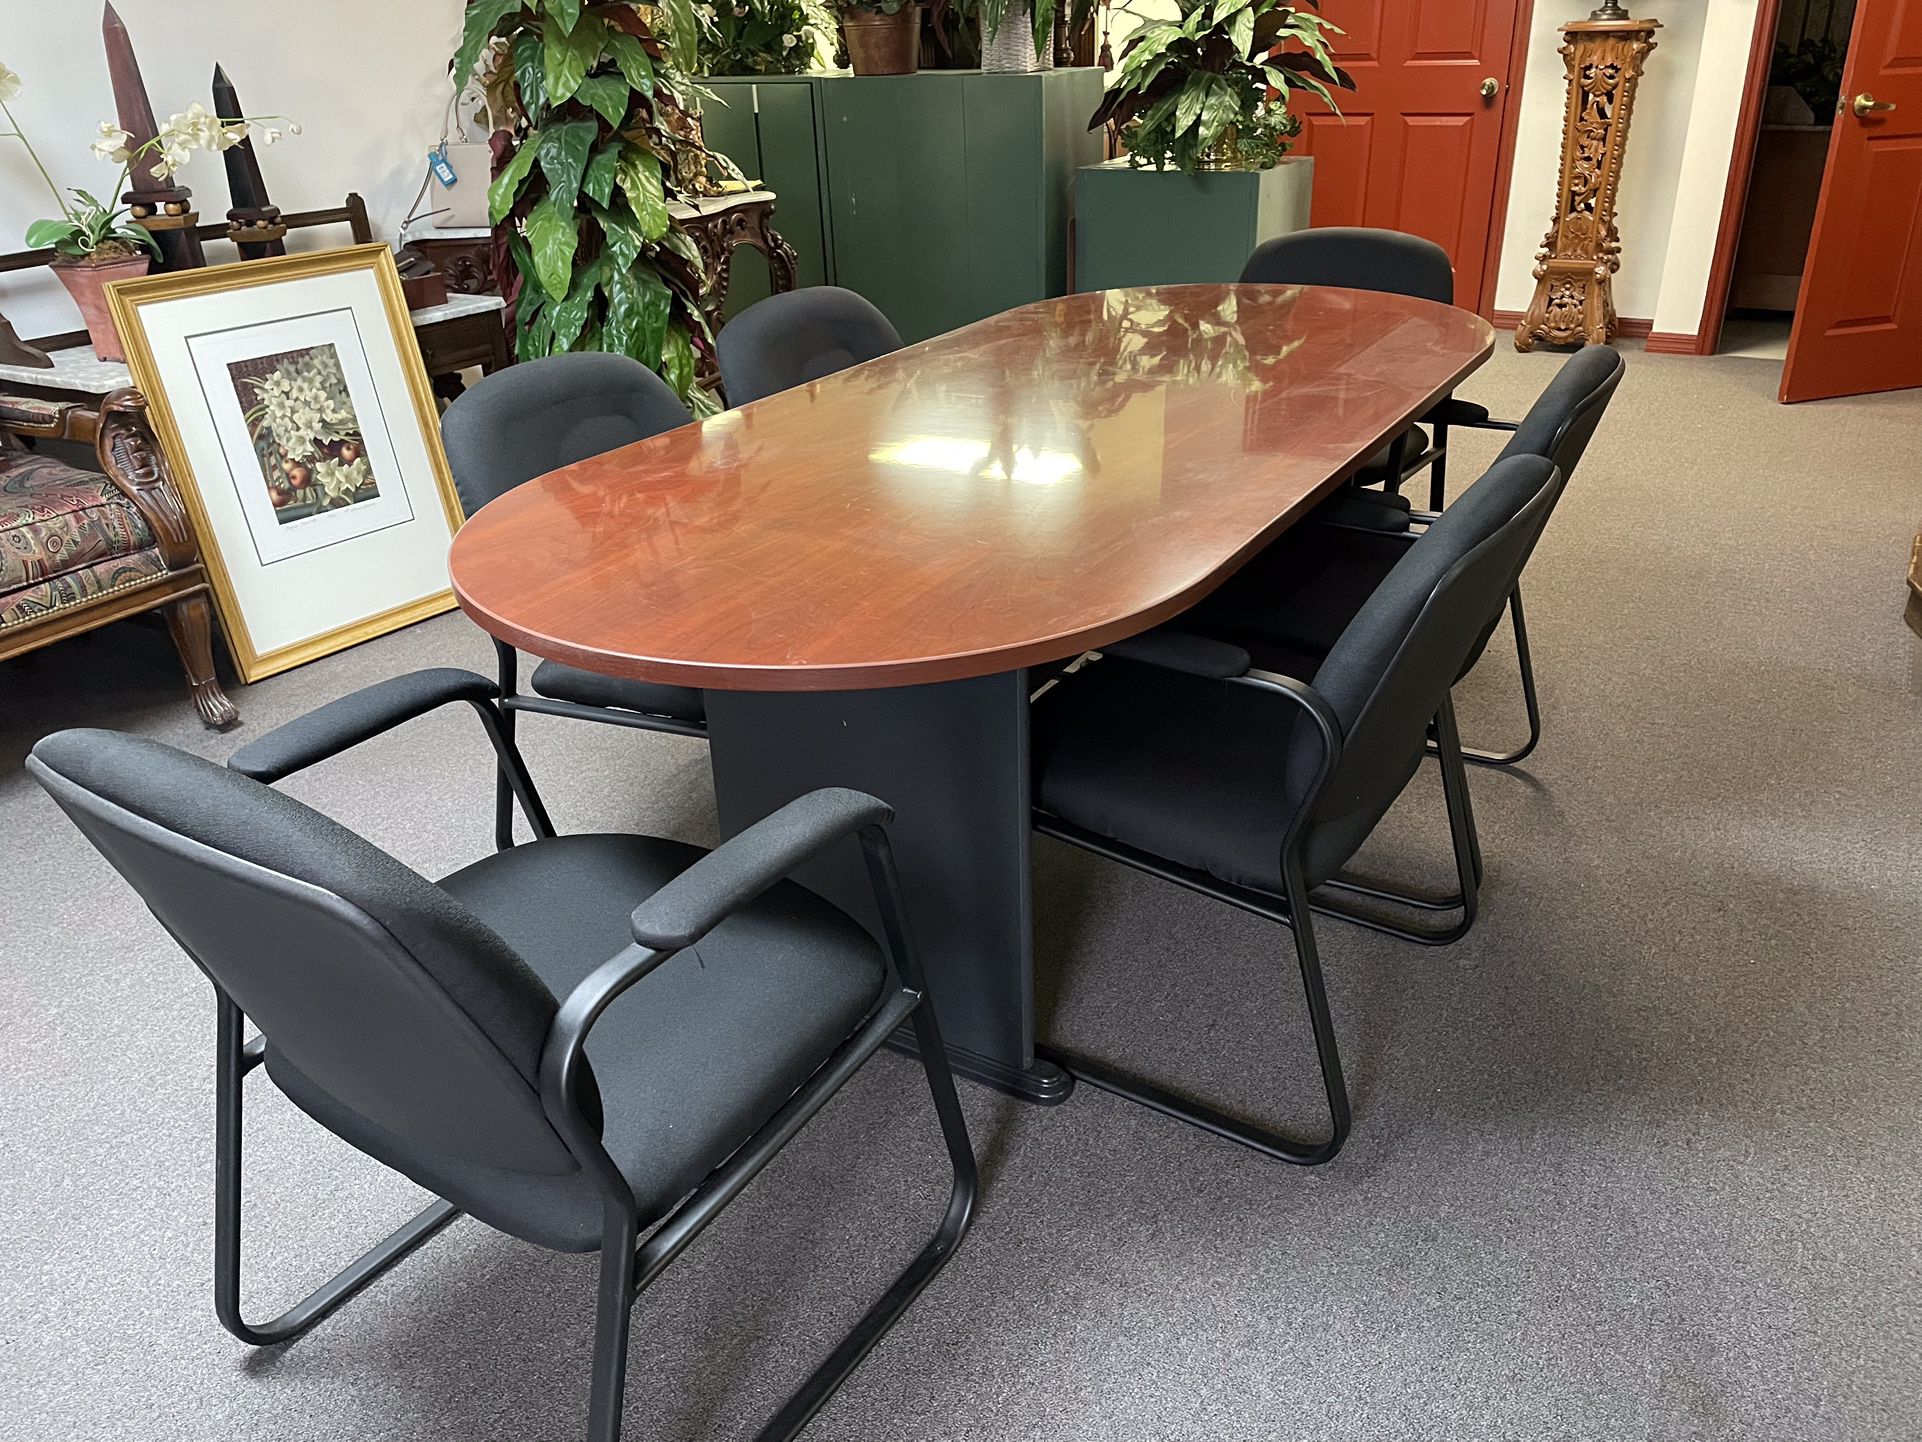 Conference Table With 6 Chairs